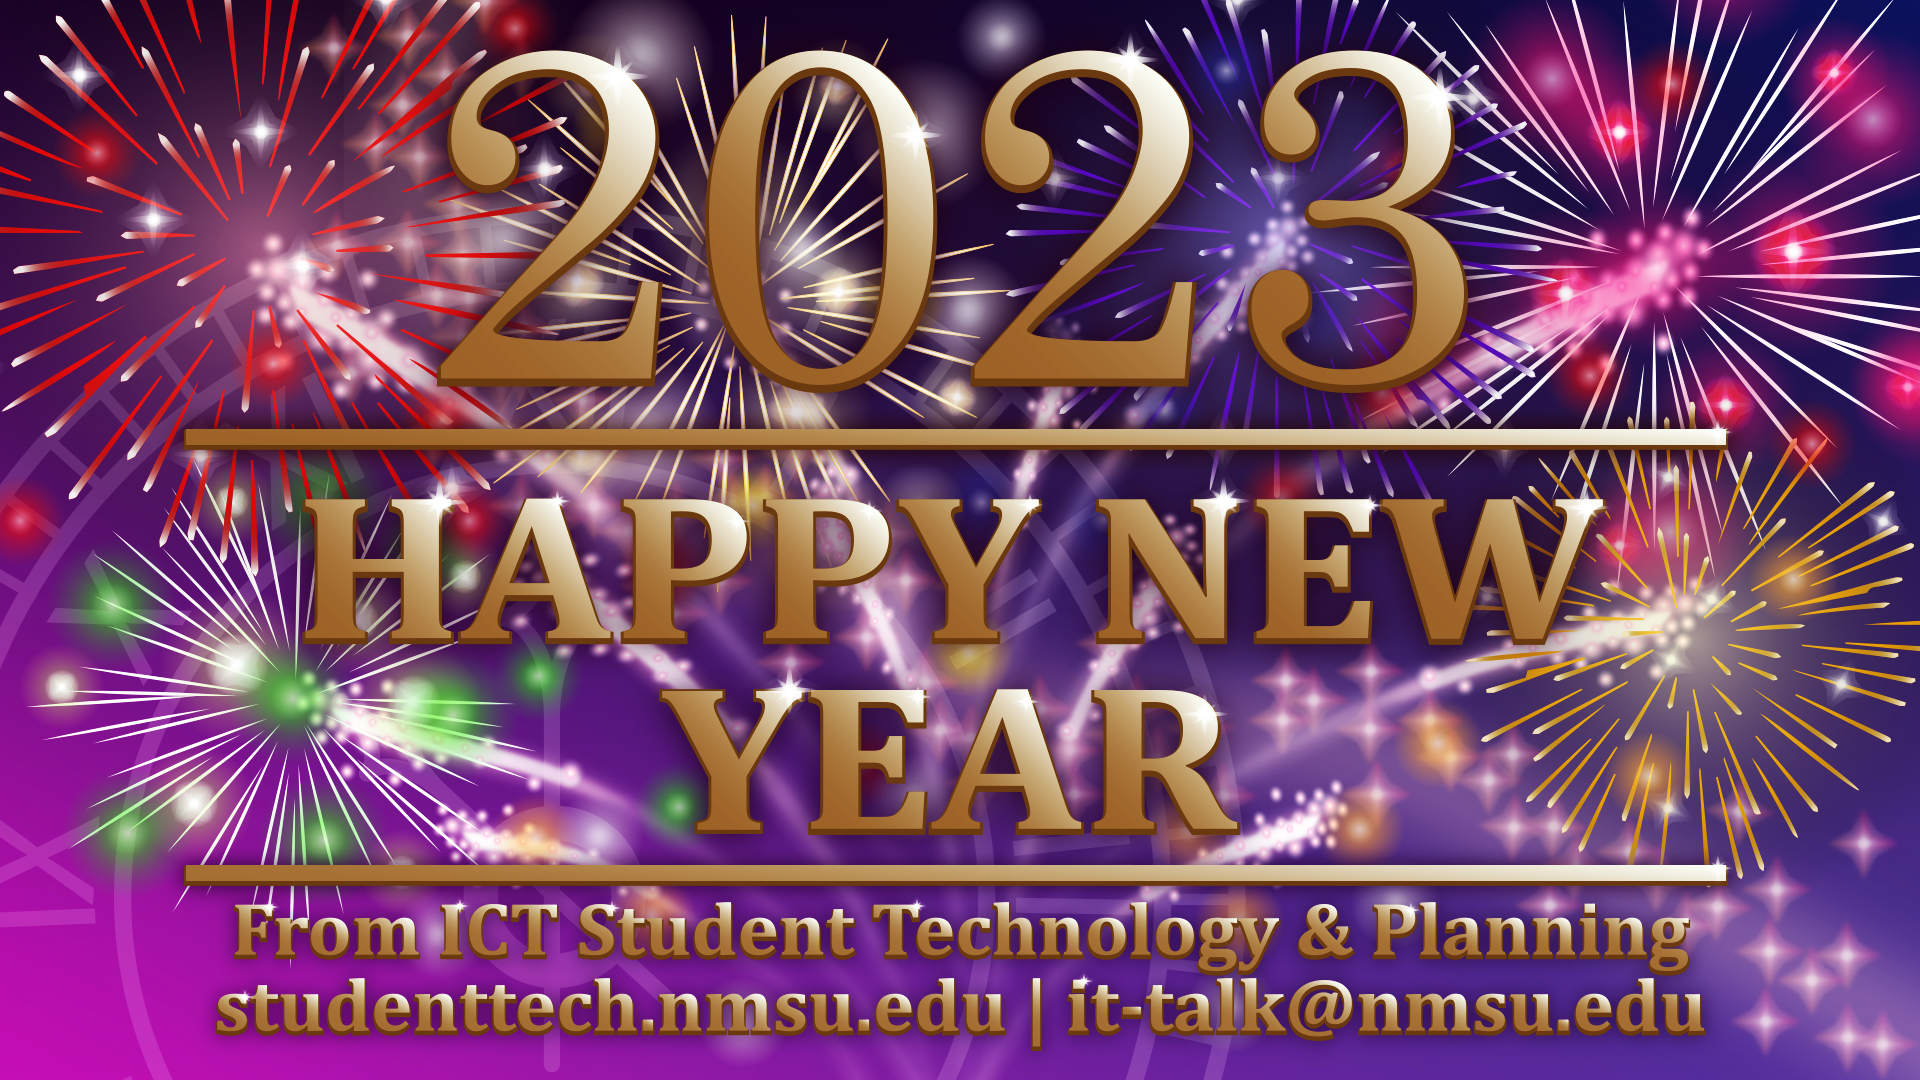 Happy New Year 2023 from ICT Student Technology & Planning